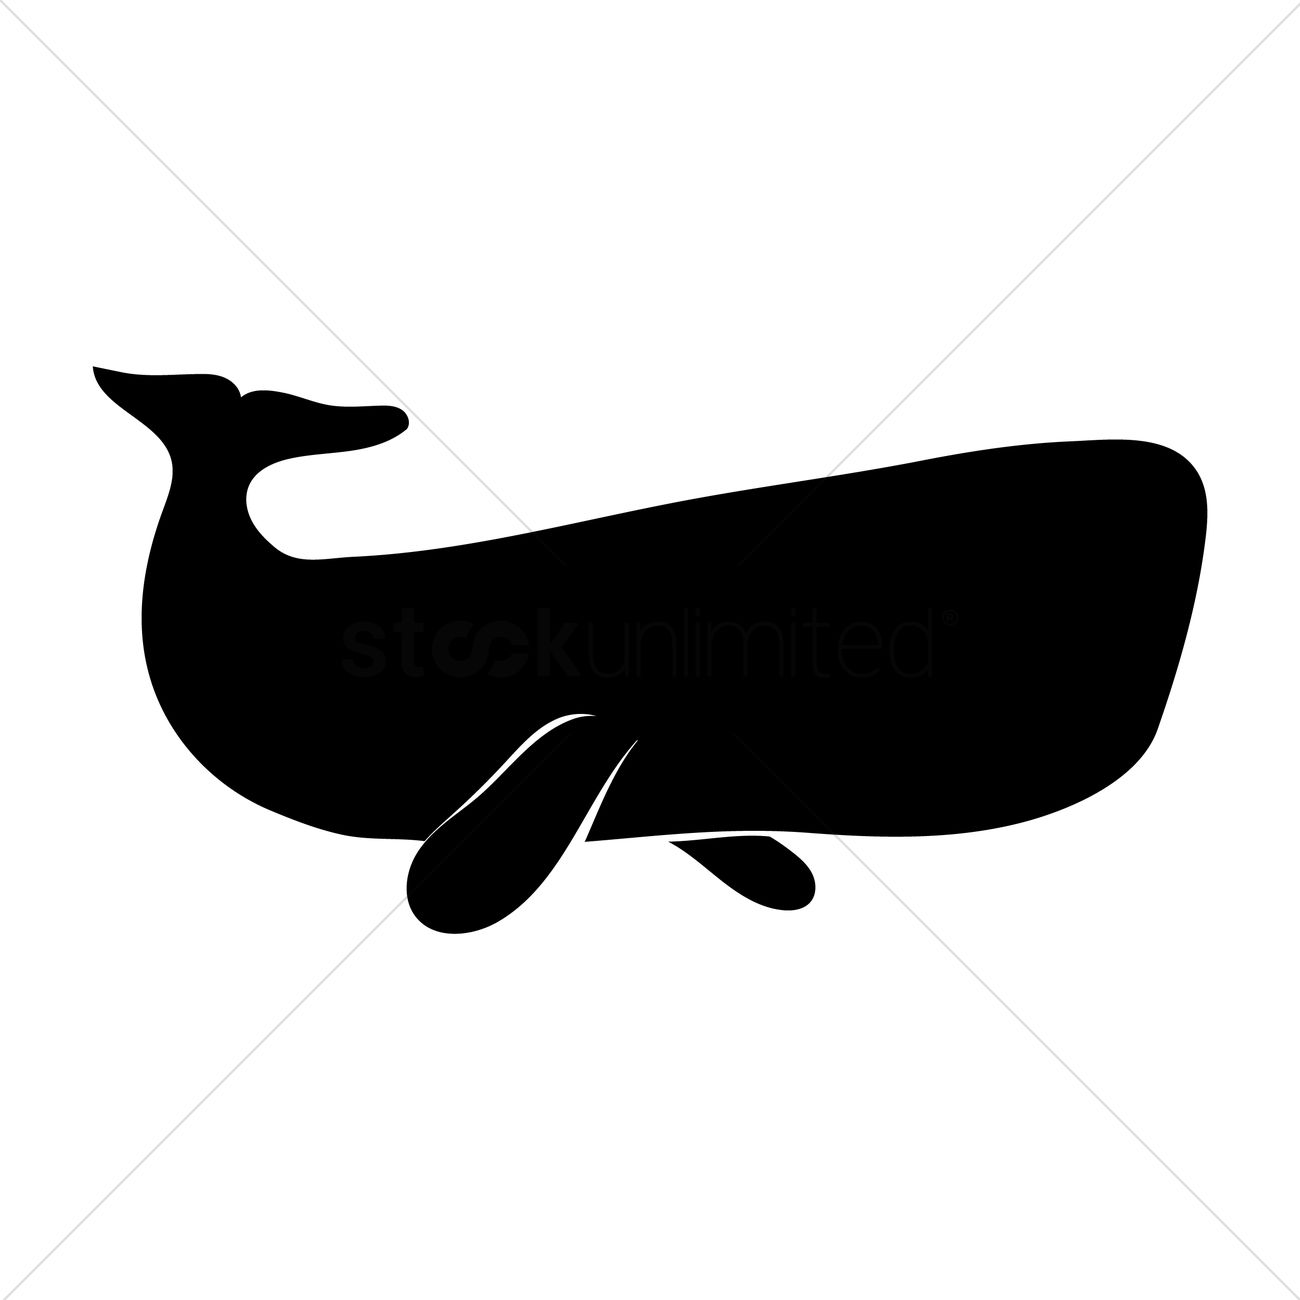 Sperm Whale svg #18, Download drawings